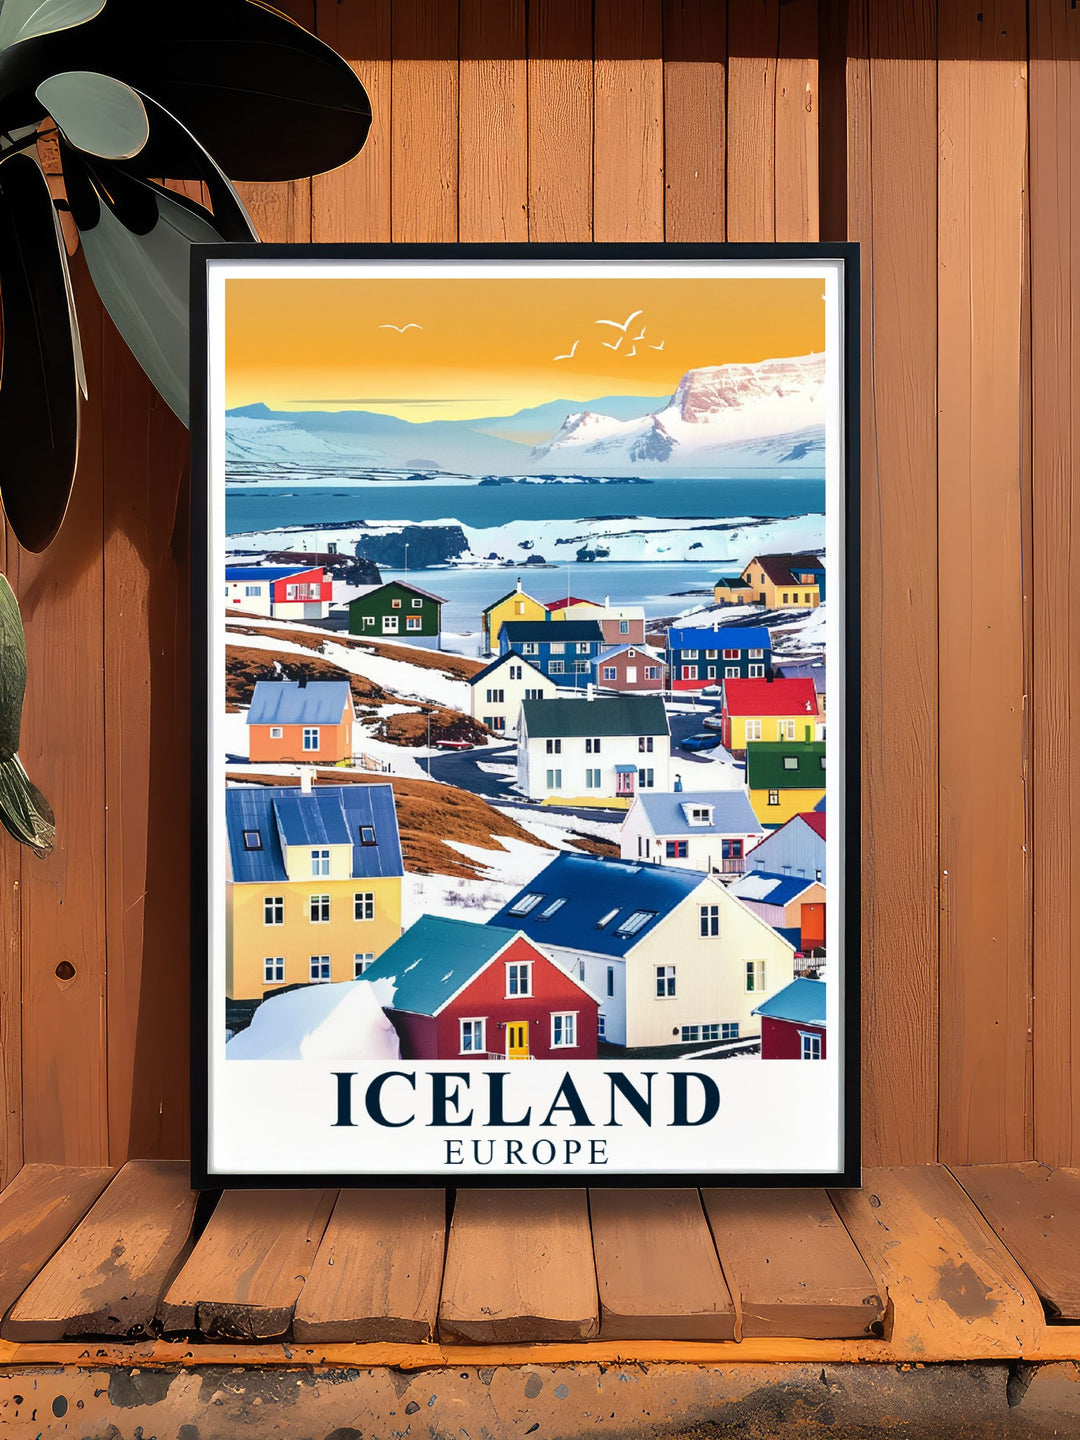 Framed art featuring the picturesque landscapes of Ísafjörður, including its vibrant fishing community and stunning natural surroundings, bringing the beauty of Iceland into your space.